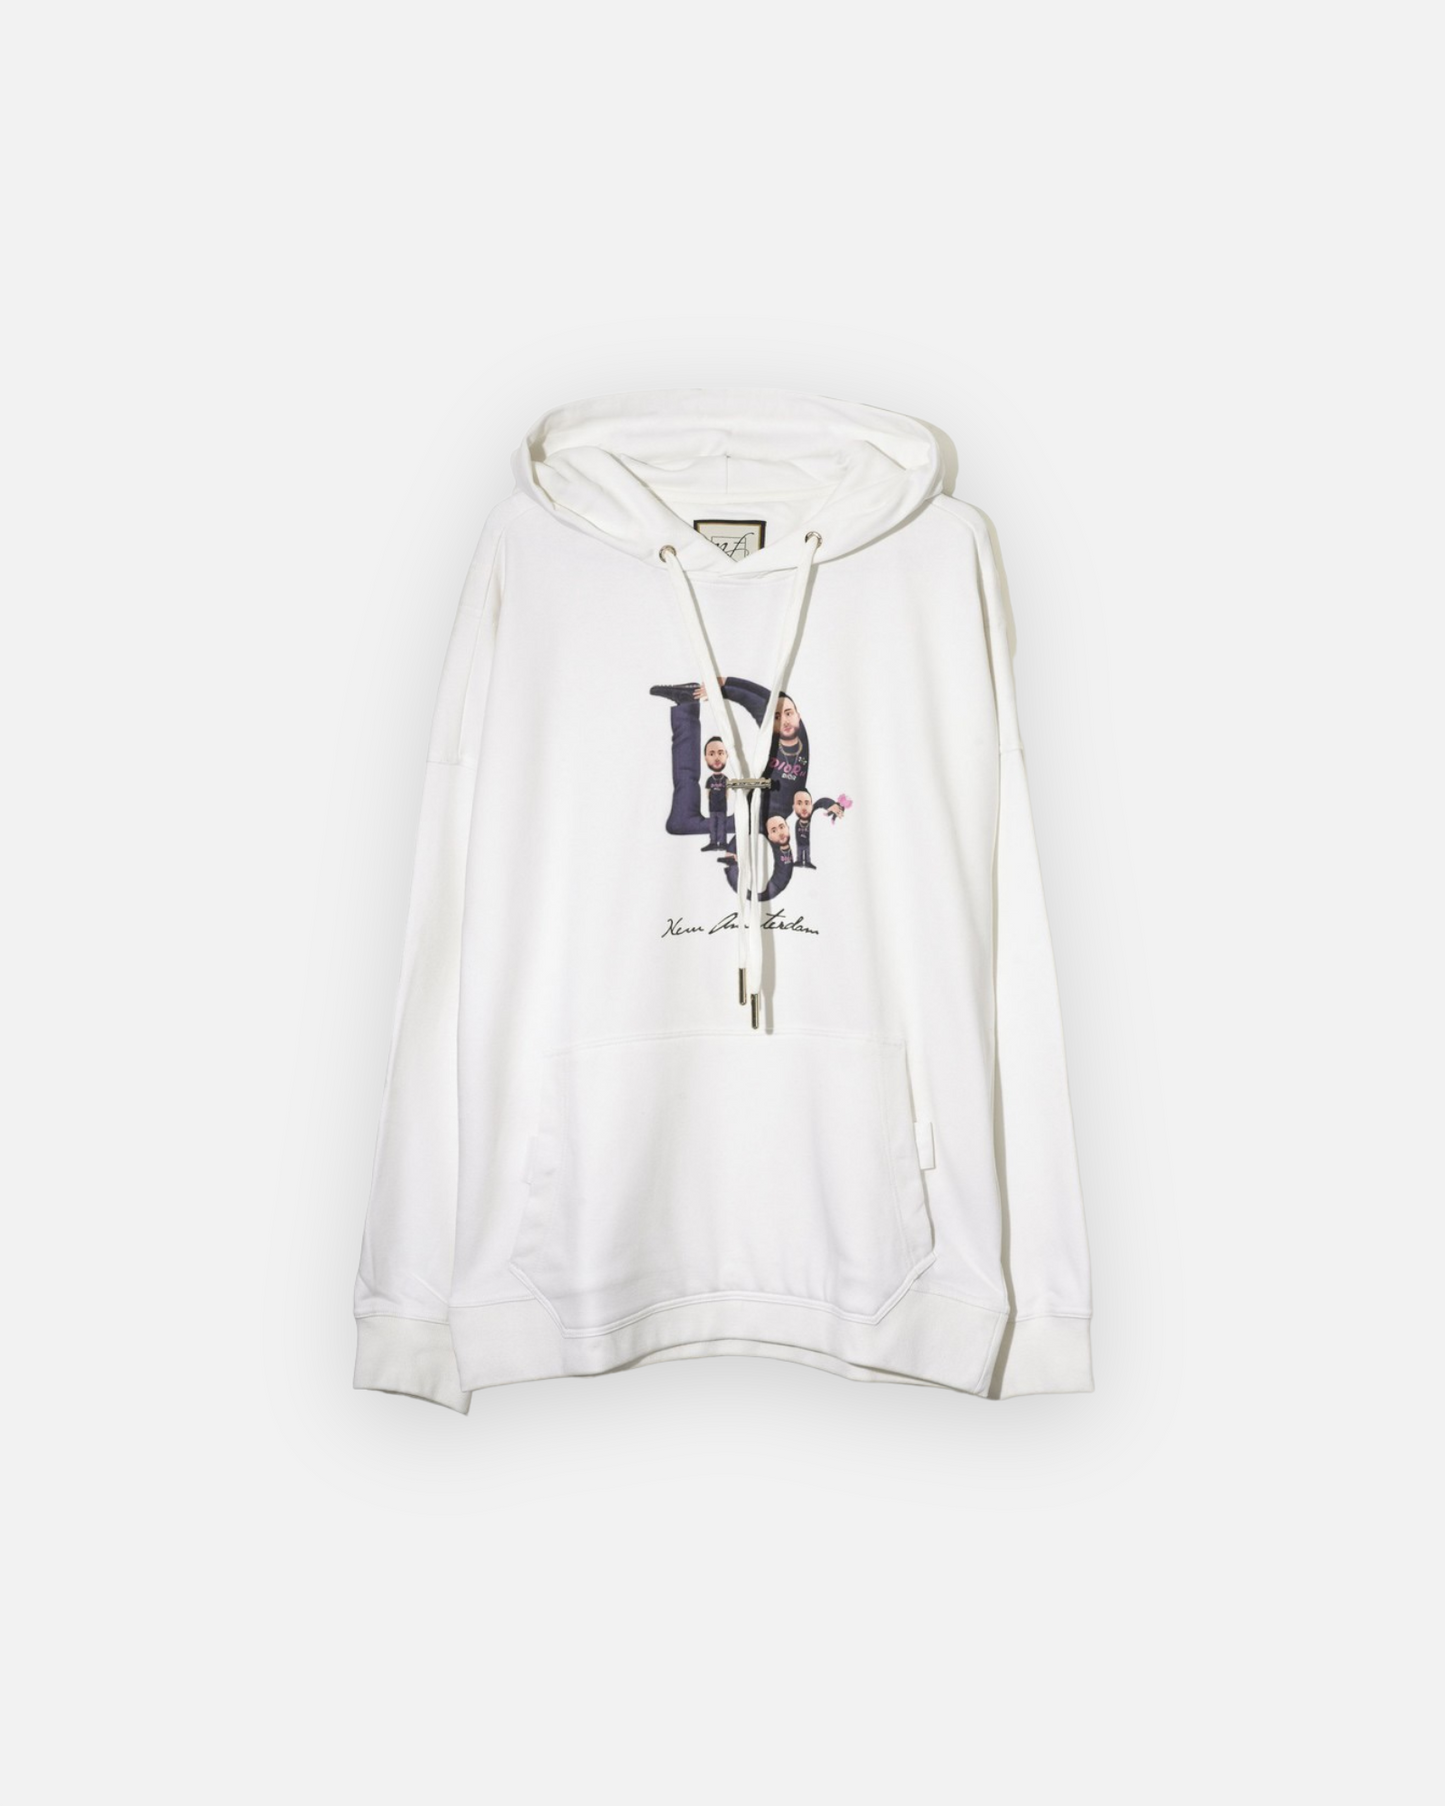 DEAR ALL BY CHRISTIAN HOODIE (WHITE)